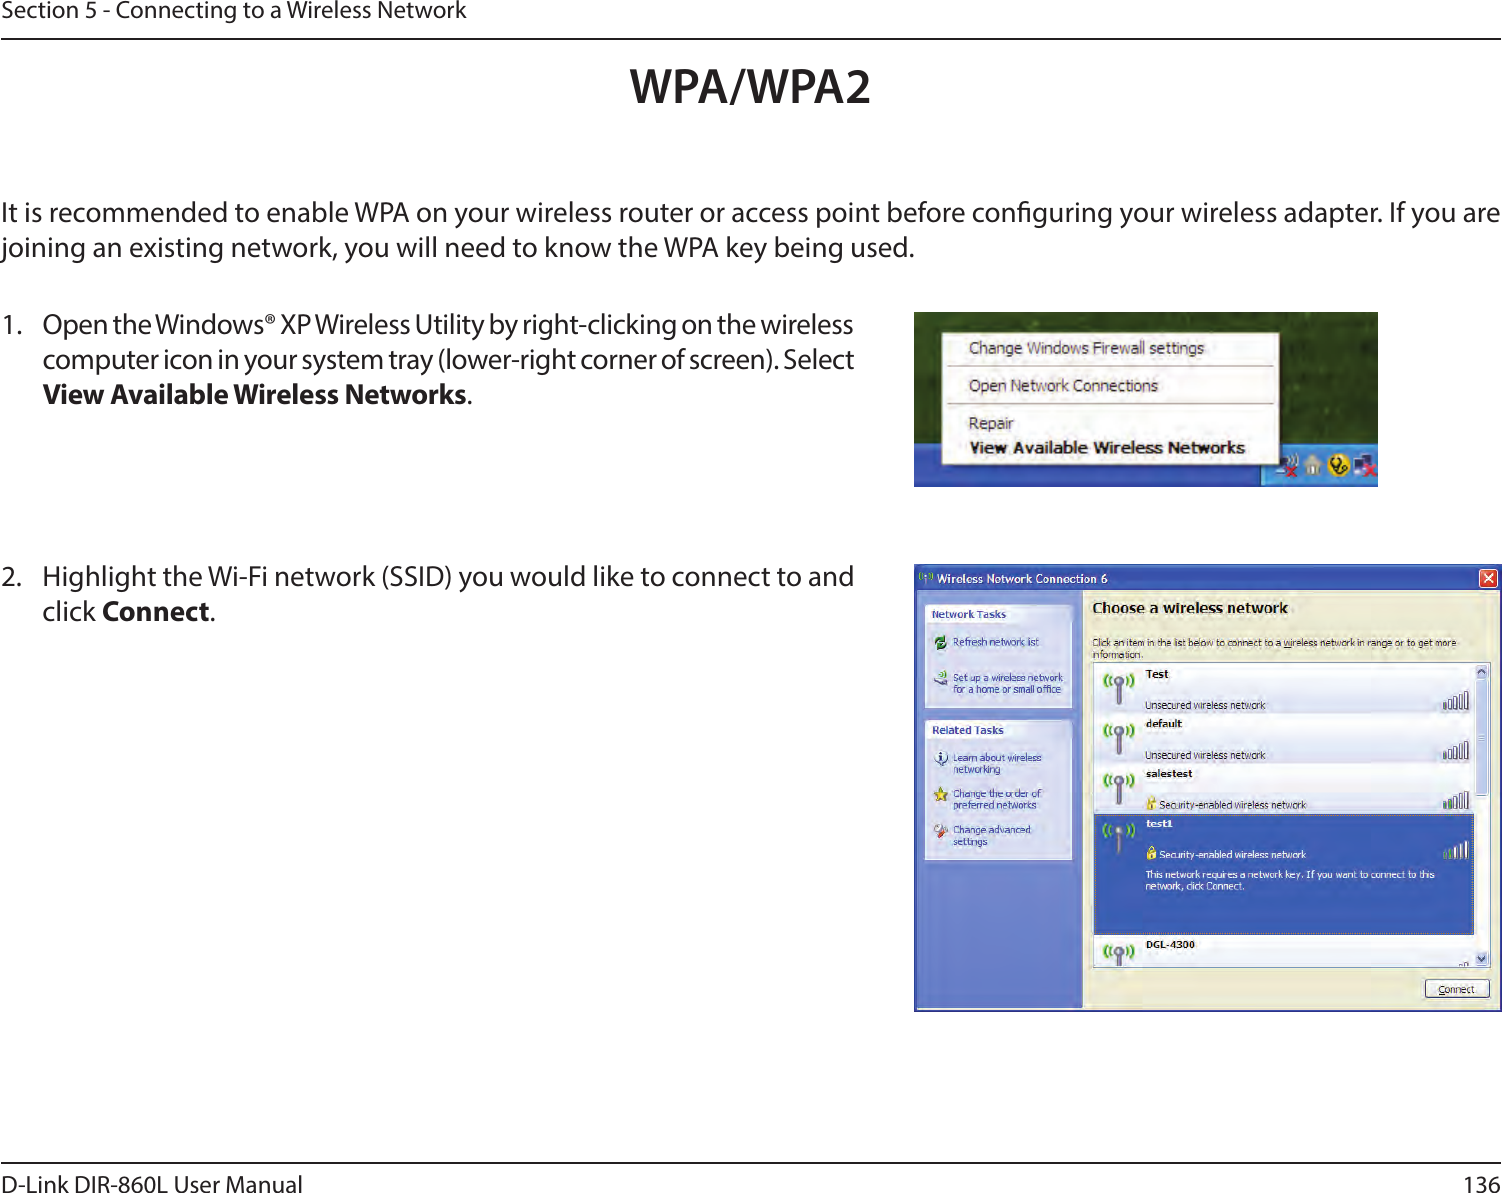 136D-Link DIR-860L User ManualSection 5 - Connecting to a Wireless NetworkIt is recommended to enable WPA on your wireless router or access point before conguring your wireless adapter. If you are joining an existing network, you will need to know the WPA key being used.2.  Highlight the Wi-Fi network (SSID) you would like to connect to and click Connect.1.  Open the Windows® XP Wireless Utility by right-clicking on the wireless computer icon in your system tray (lower-right corner of screen). Select View Available Wireless Networks. WPA/WPA2